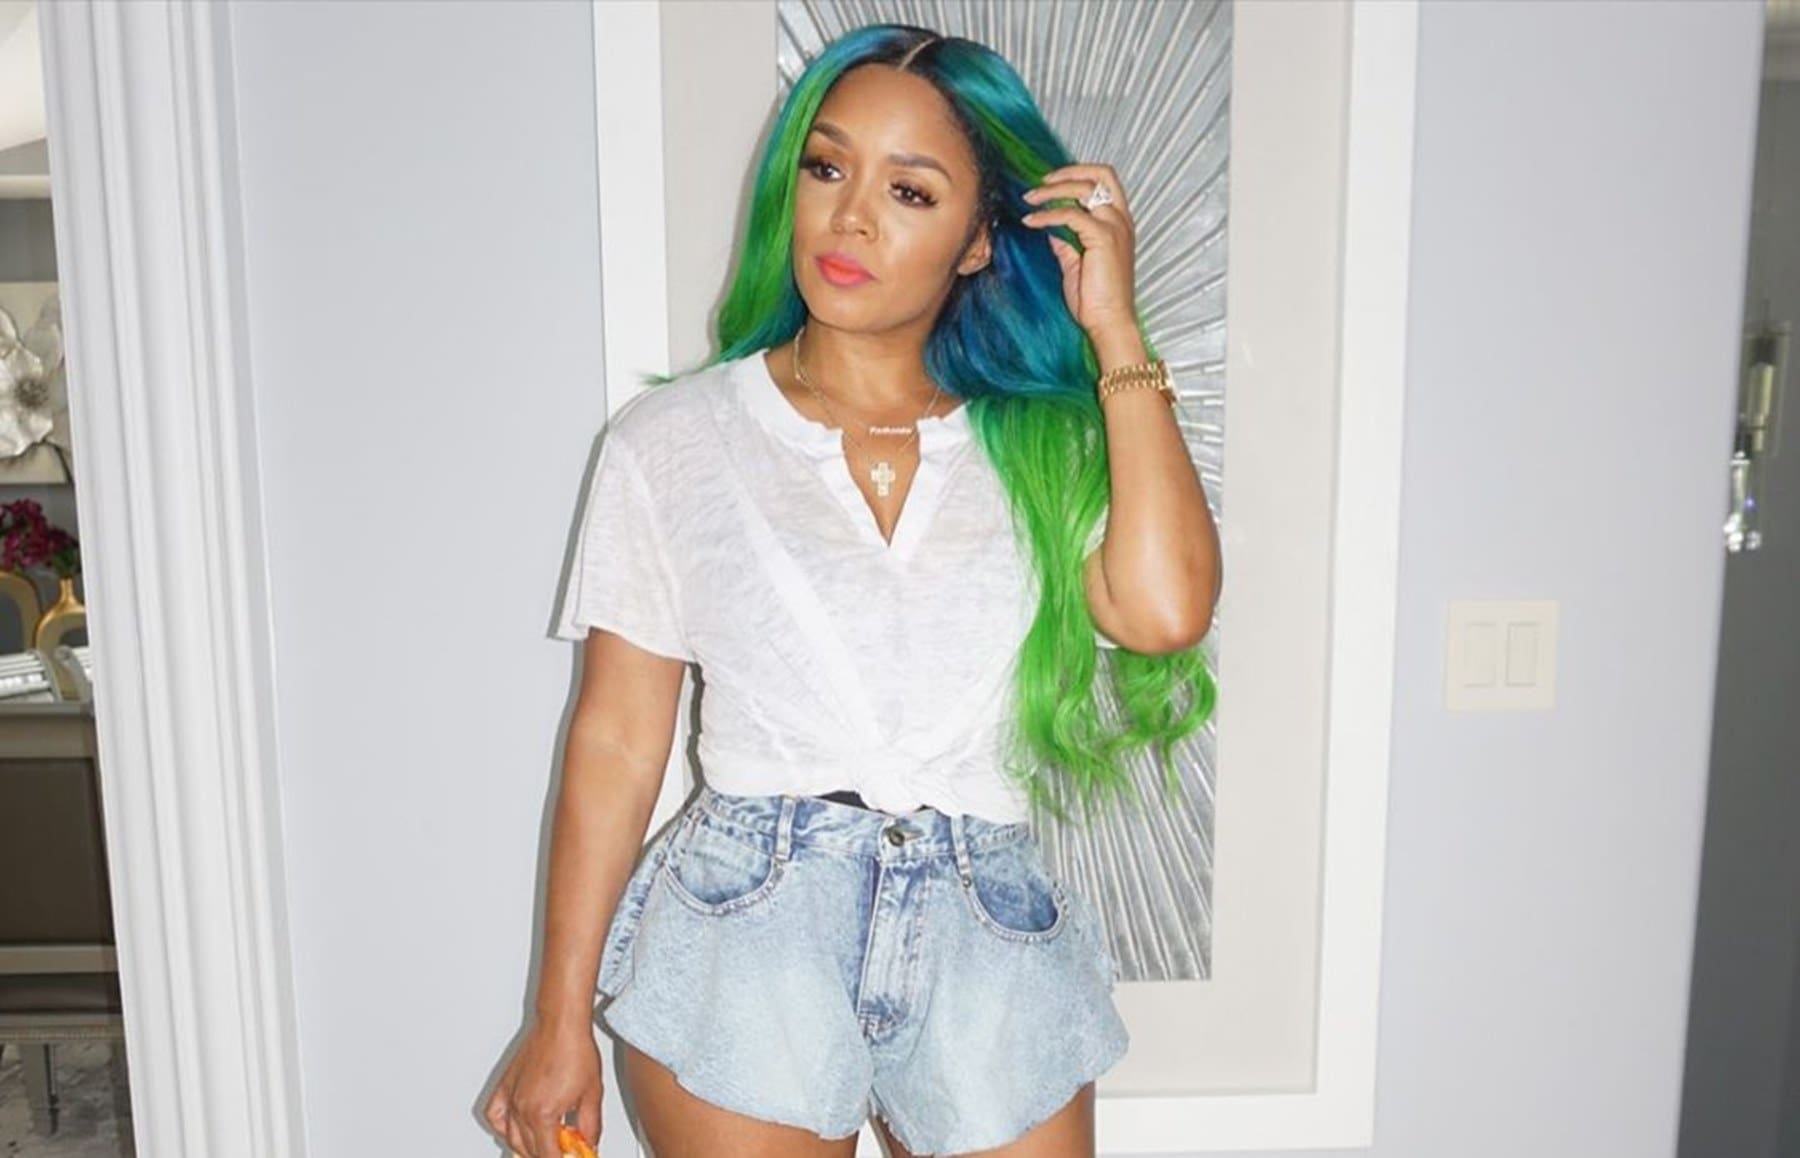 ”rasheeda-frosts-jaw-dropping-look-has-fans-in-love-check-out-her-new-hair-in-the-clip”